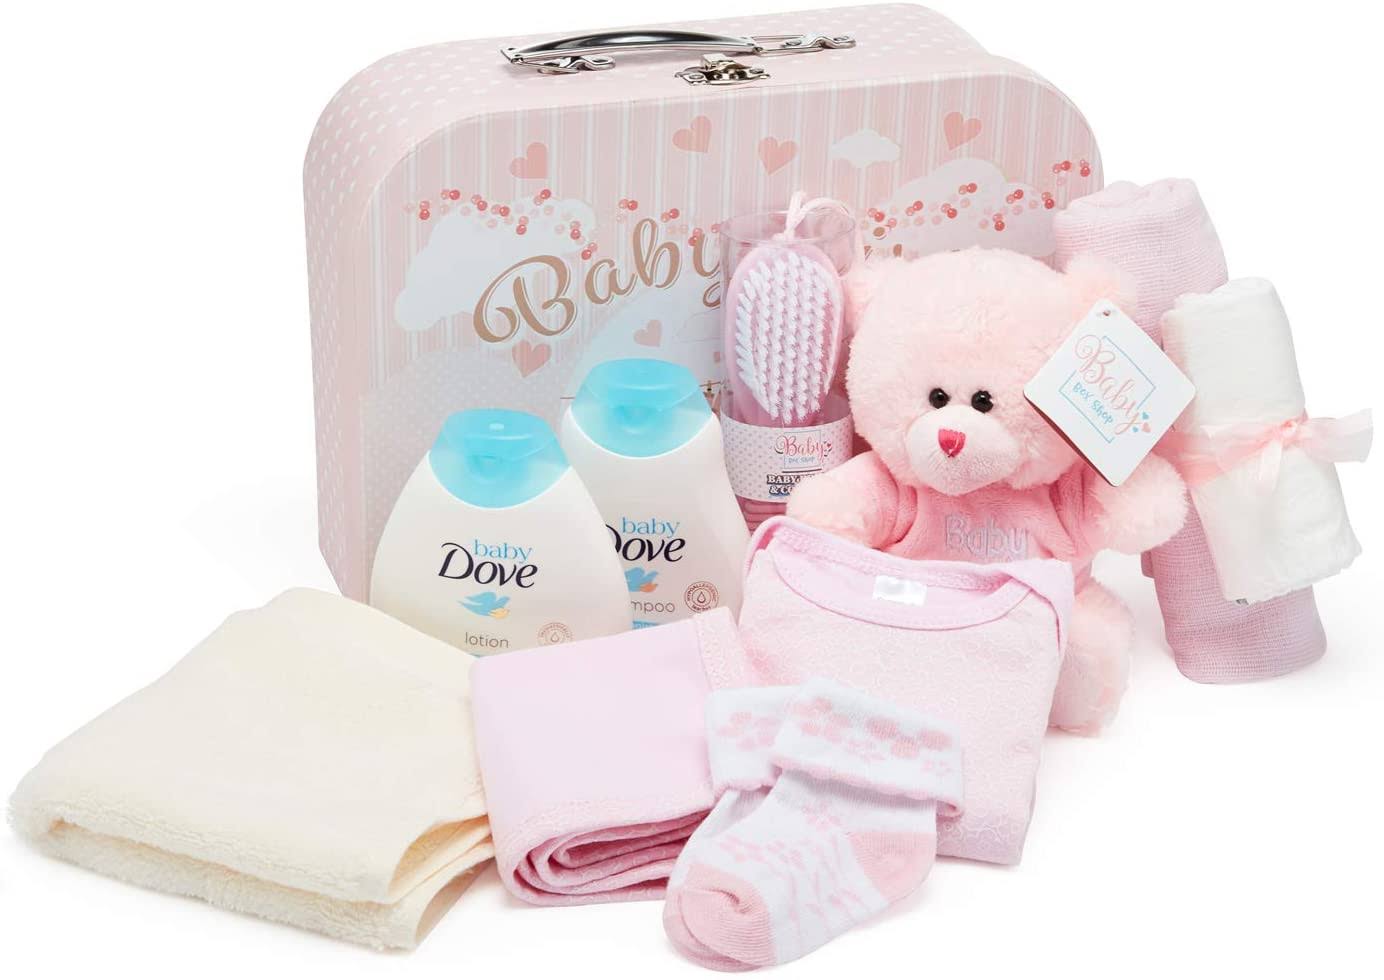 Baby Gift Set Keepsake Box In Pink With Baby Clothes, Teddy Bear And G